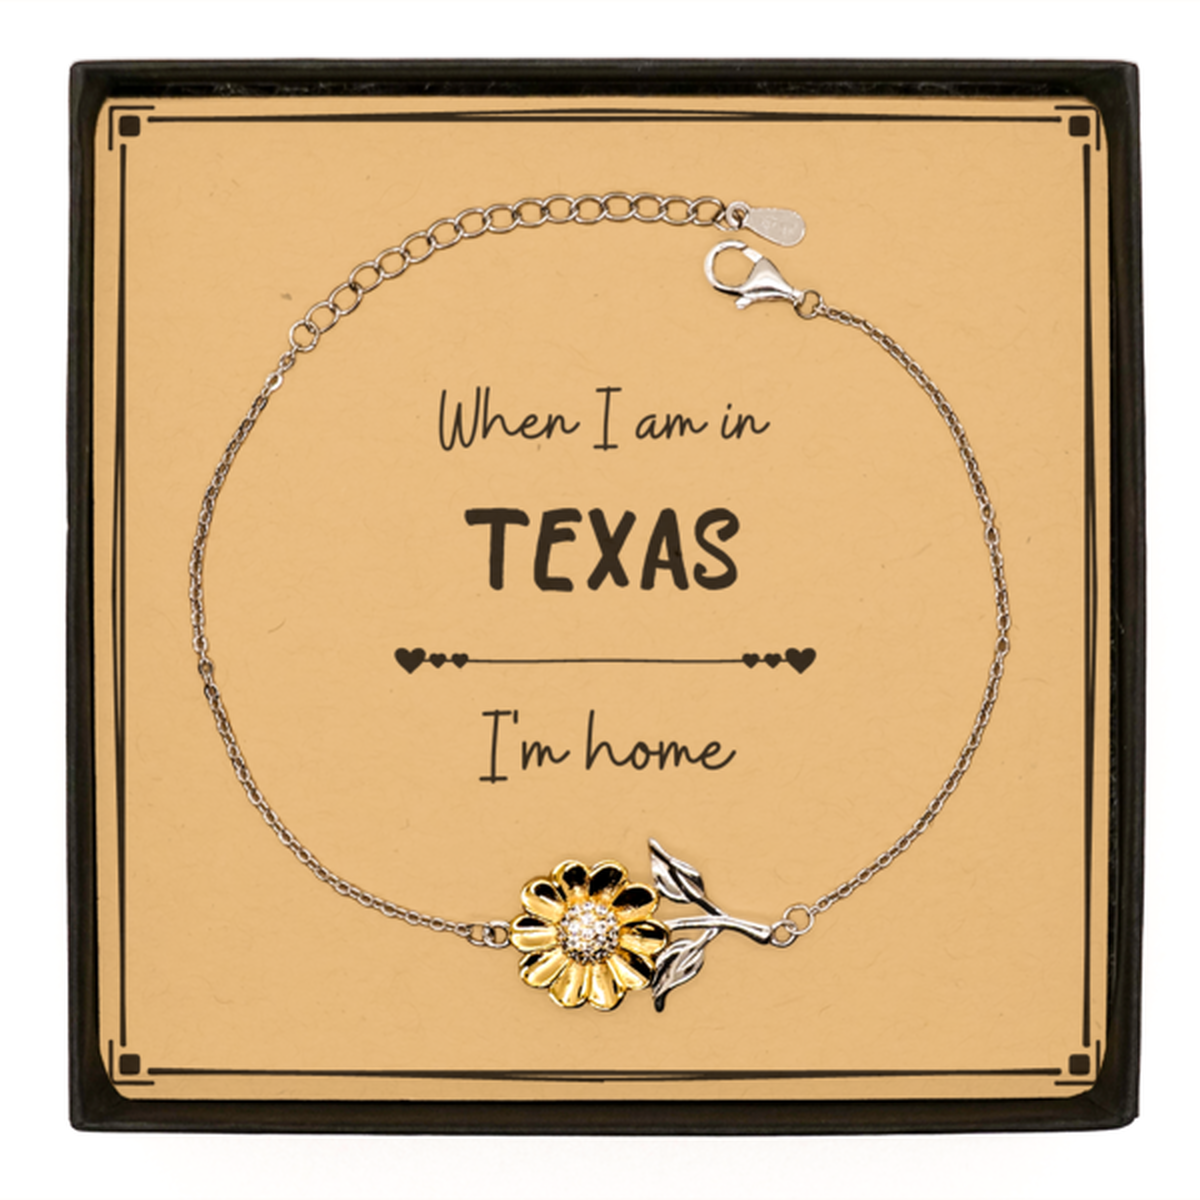 When I am in Texas I'm home Sunflower Bracelet, Message Card Gifts For Texas, State Texas Birthday Gifts for Friends Coworker